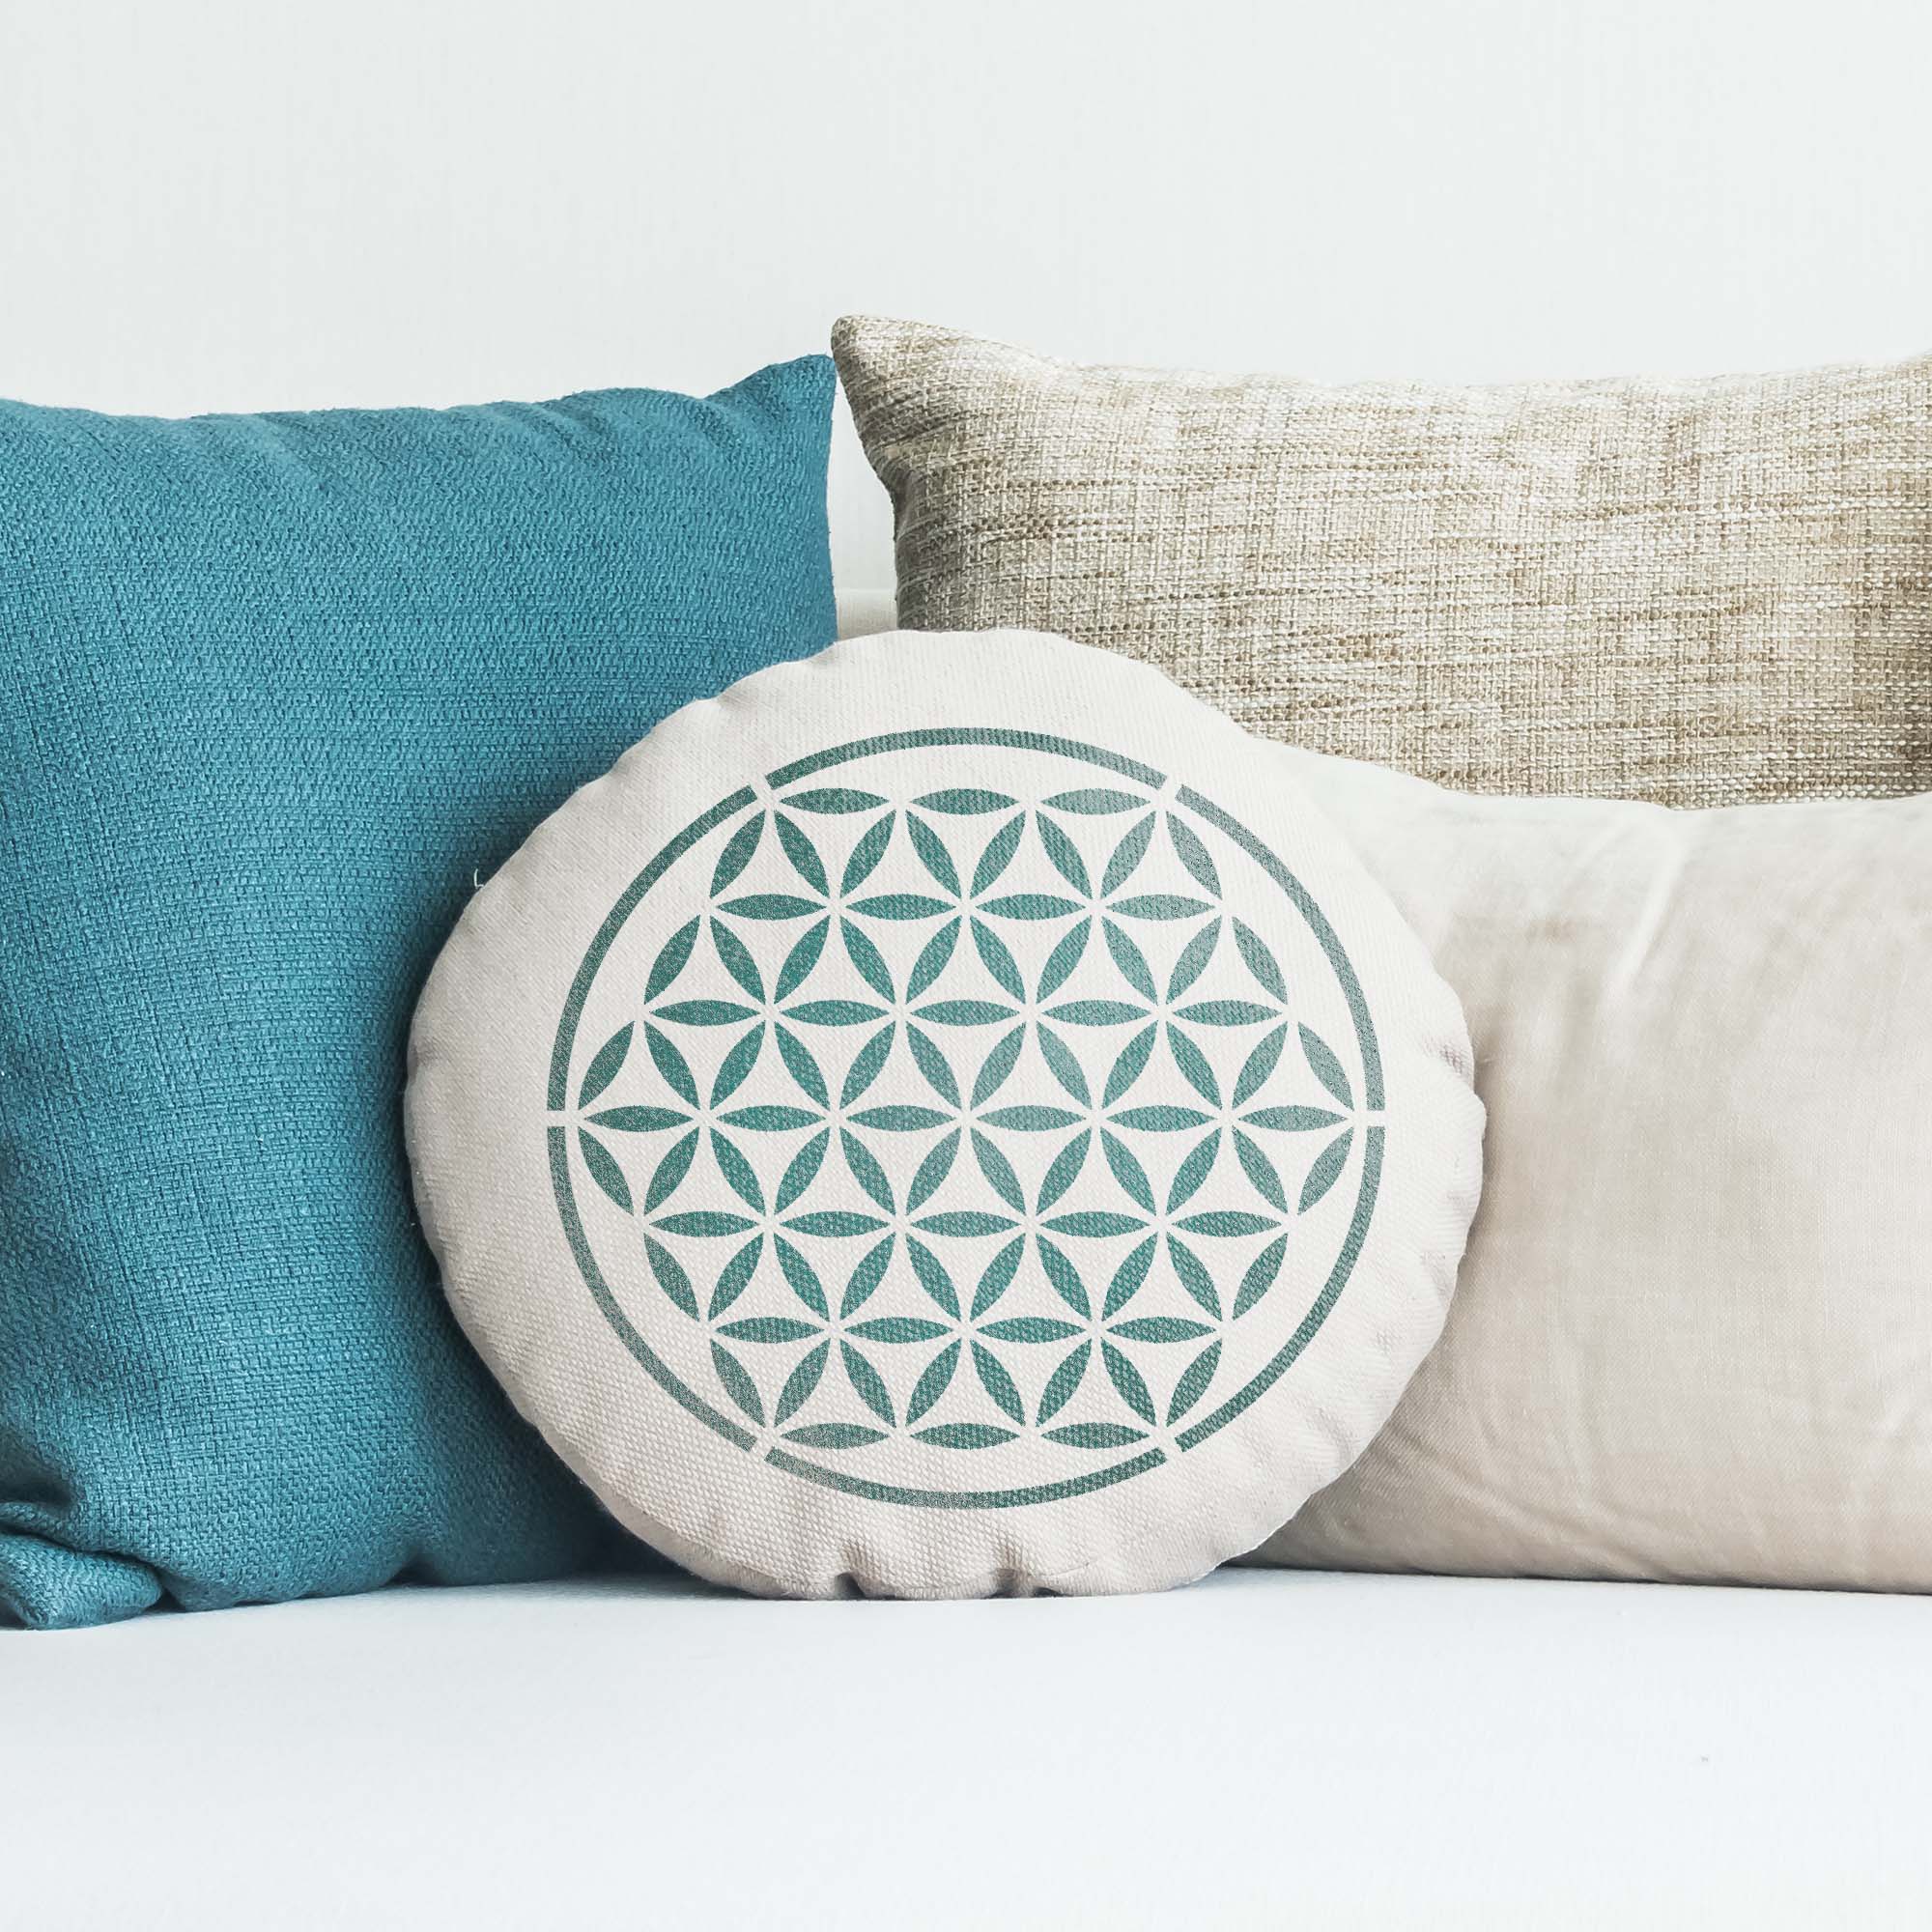 CraftStar Flower of Life Stencil painted on fabric cushion